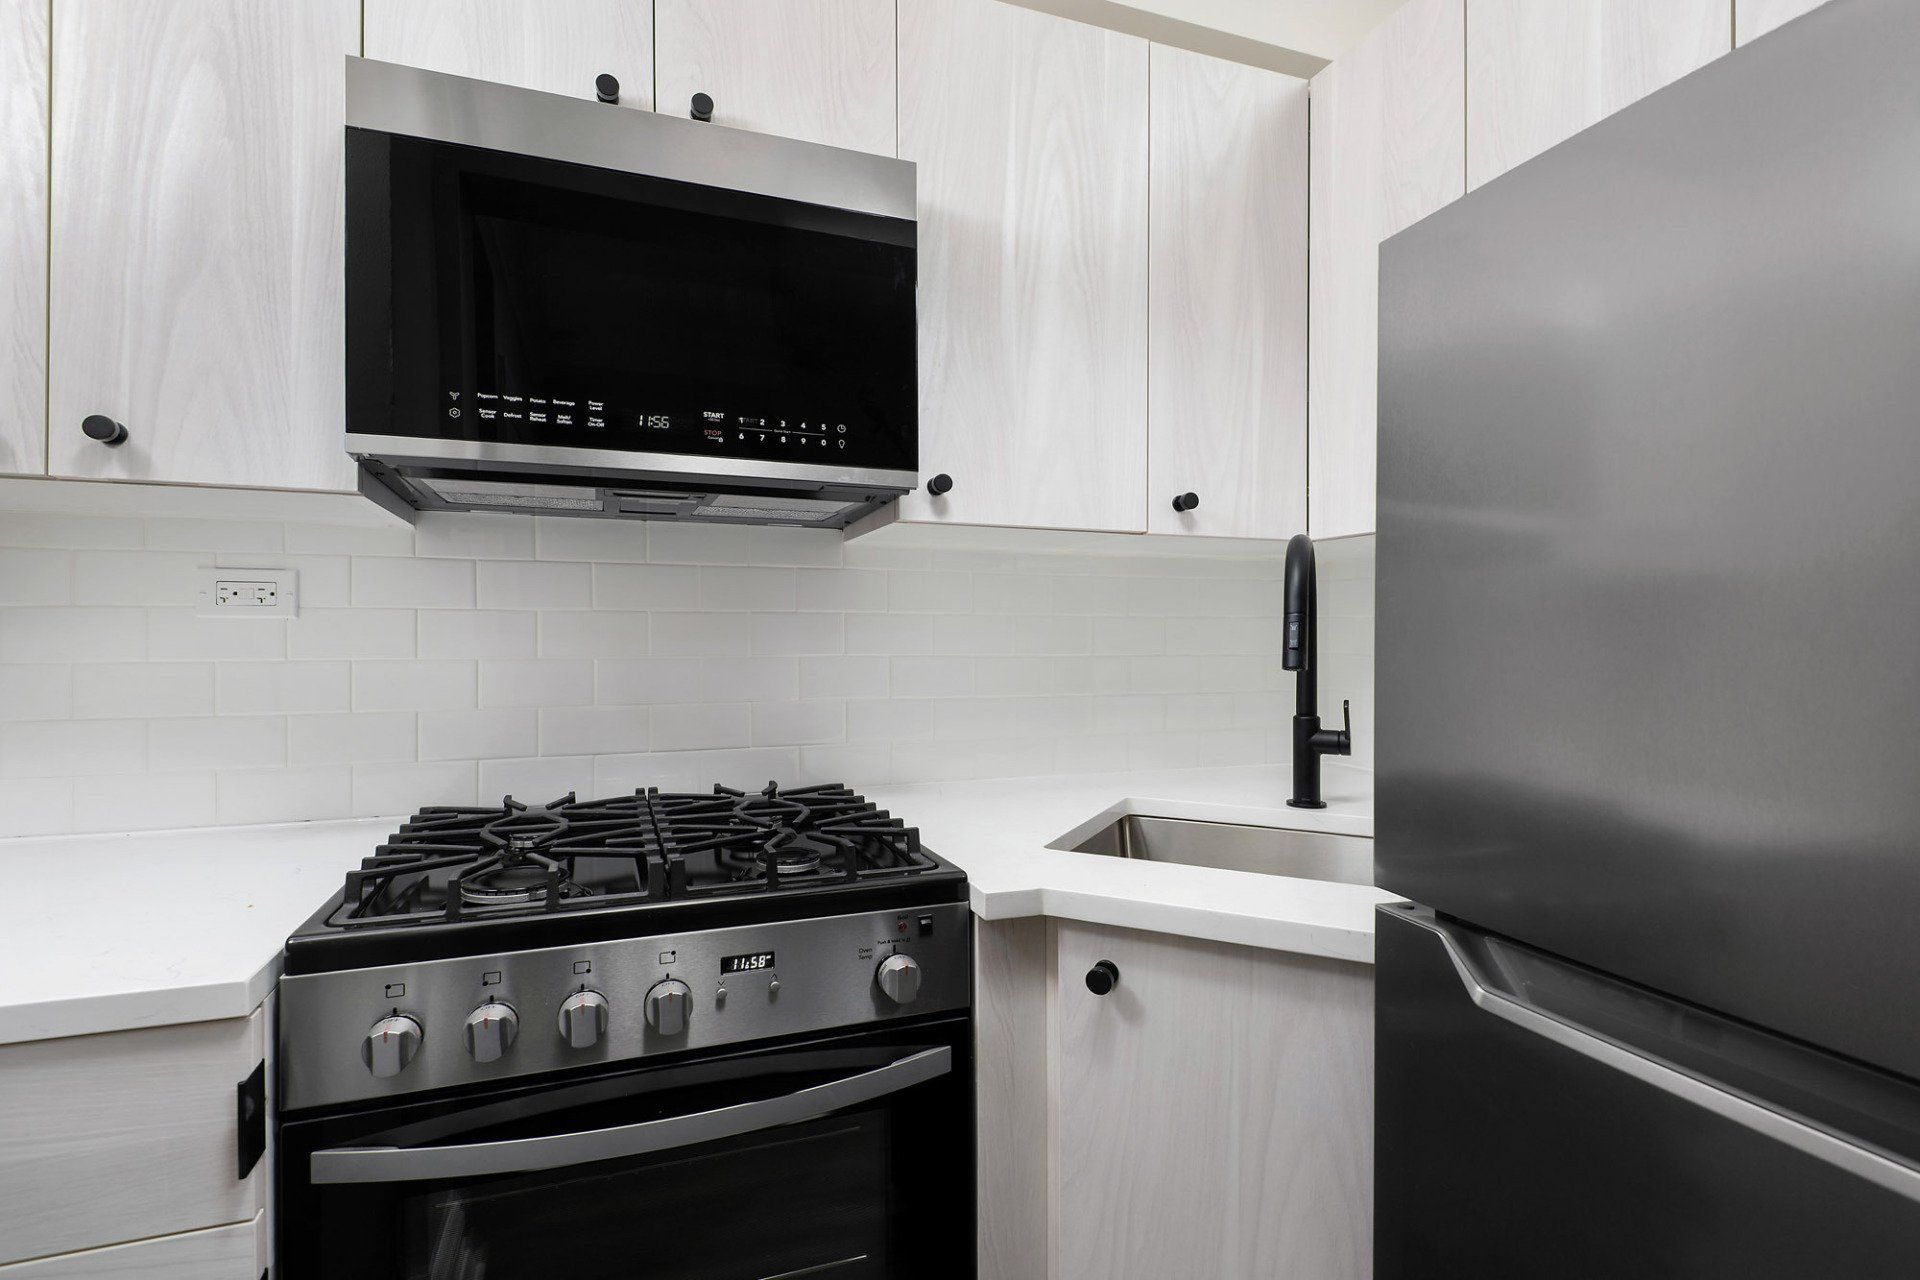 A kitchen with a stove , refrigerator , sink and microwave at Reside on Clarendon.